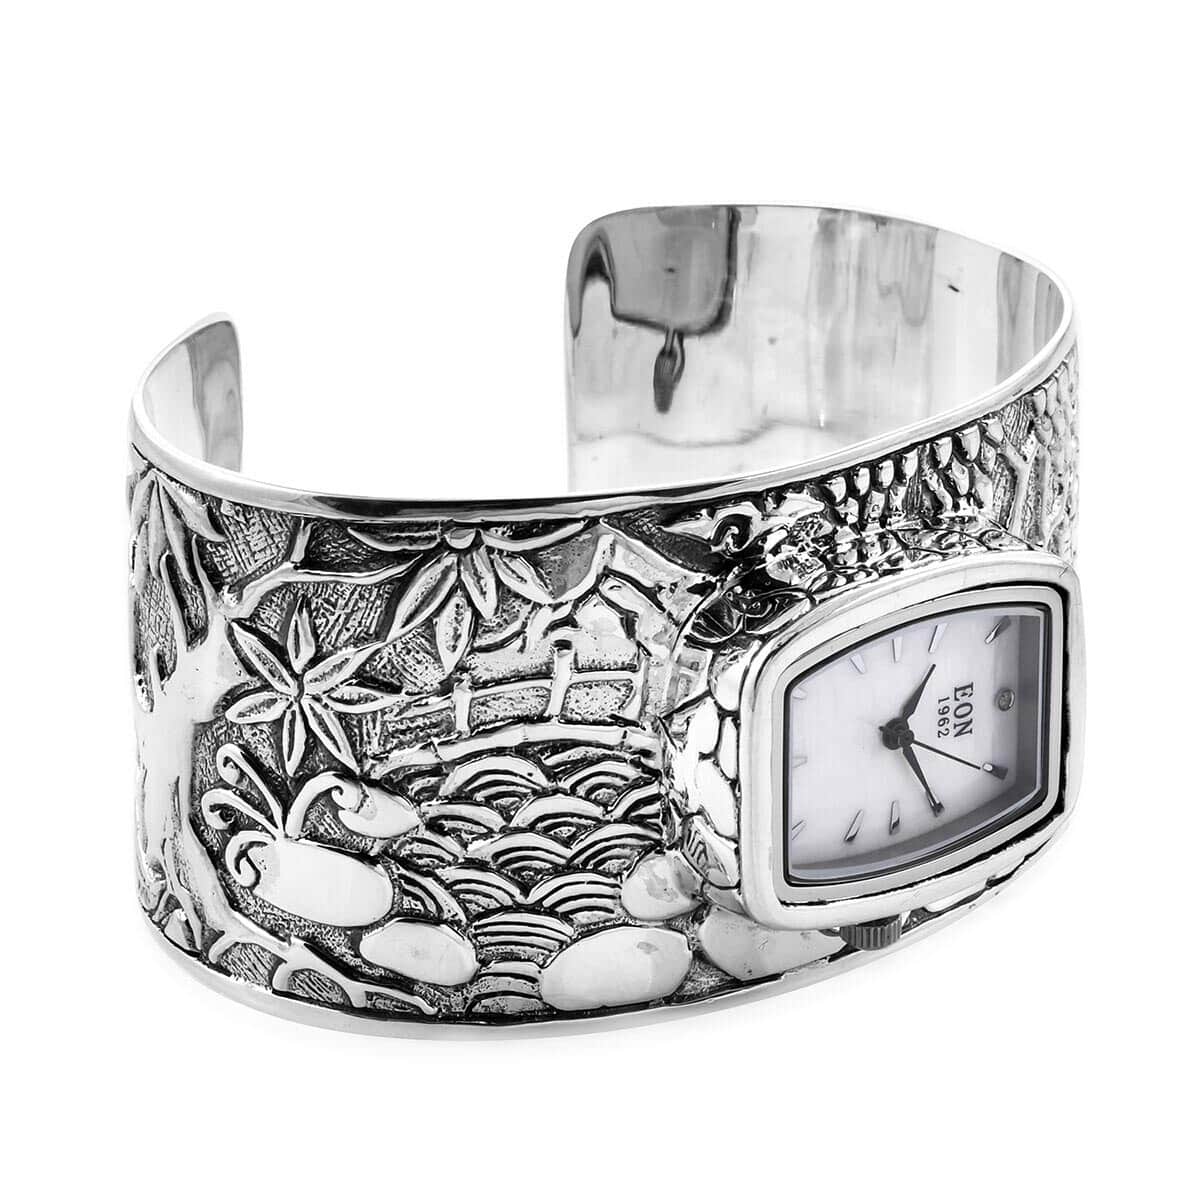 BALI LEGACY EON 1962 Swiss Movement Cuff Bracelet Watch in Sterling Silver with Stainless Steel Back , Designer Bracelet Watch , Analog Luxury Wristwatch image number 4